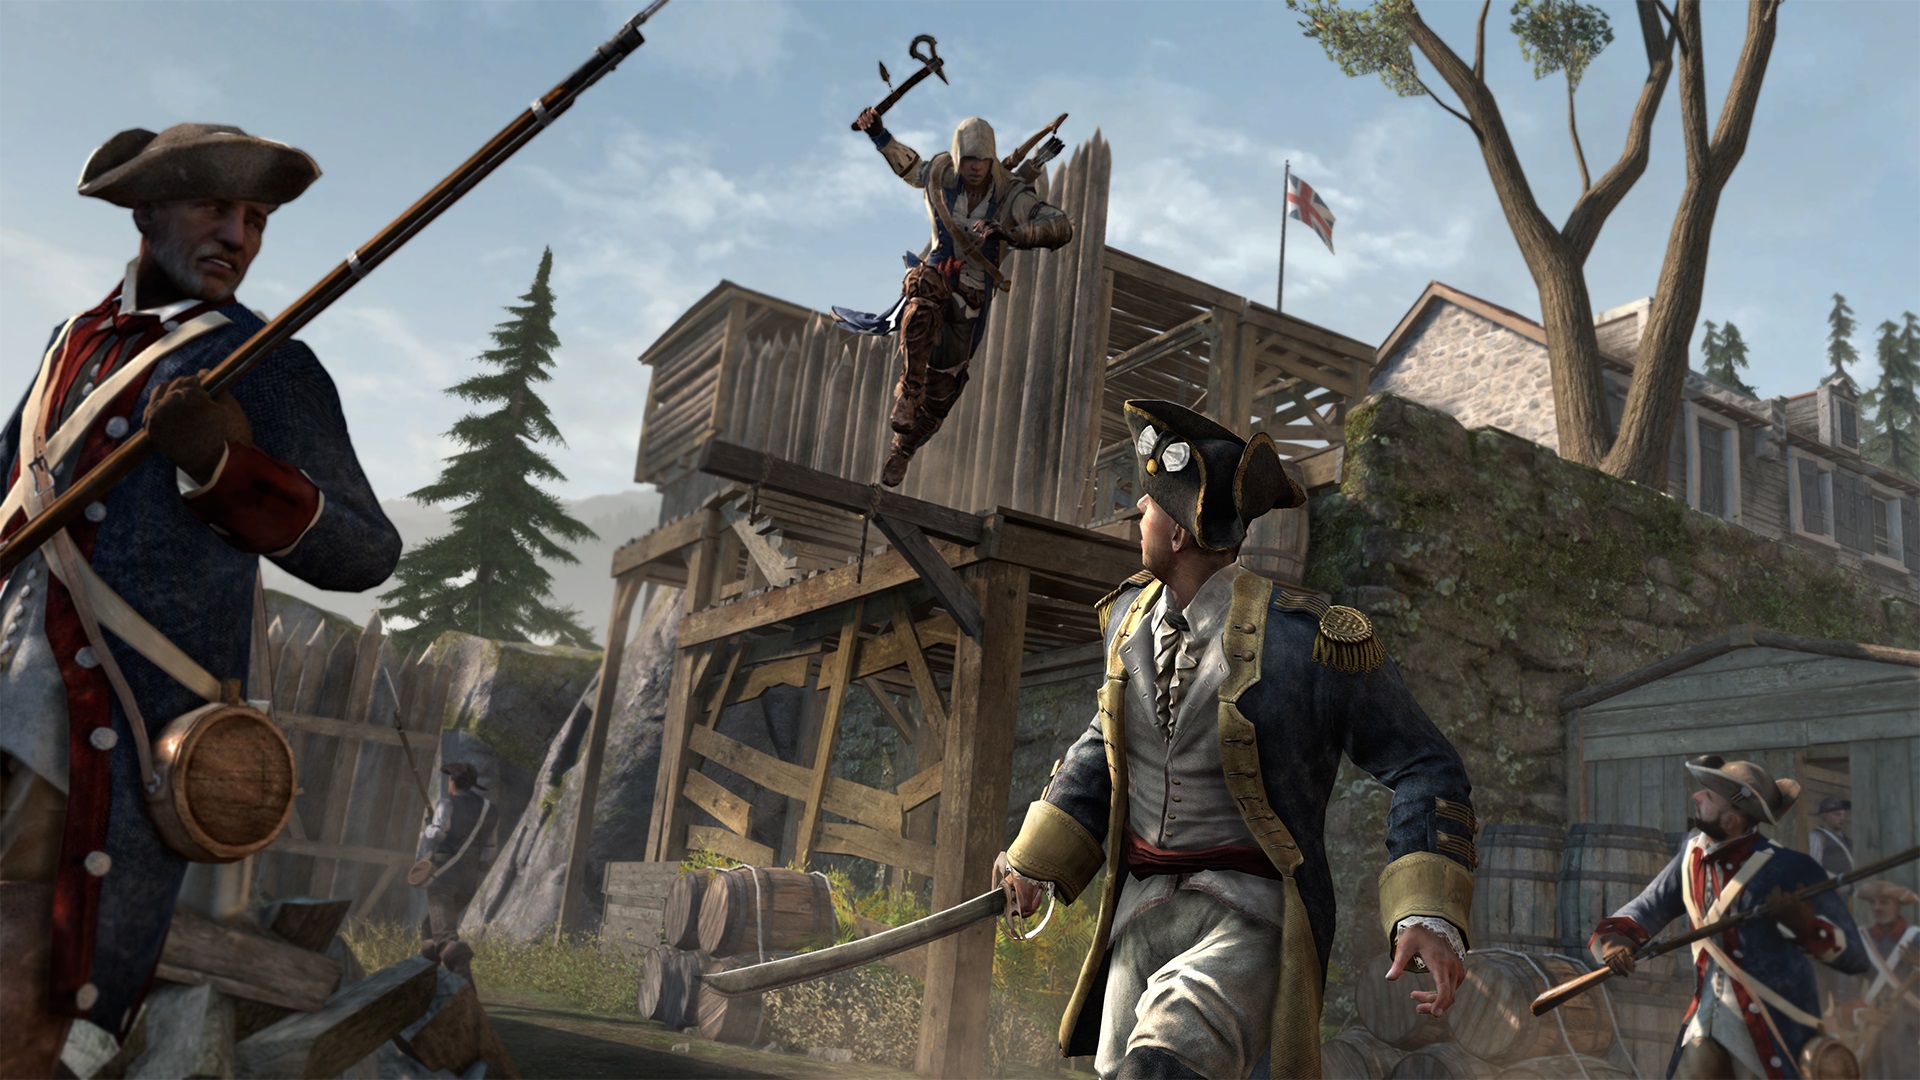 Nice Images Collection: Assassin's Creed III Desktop Wallpapers